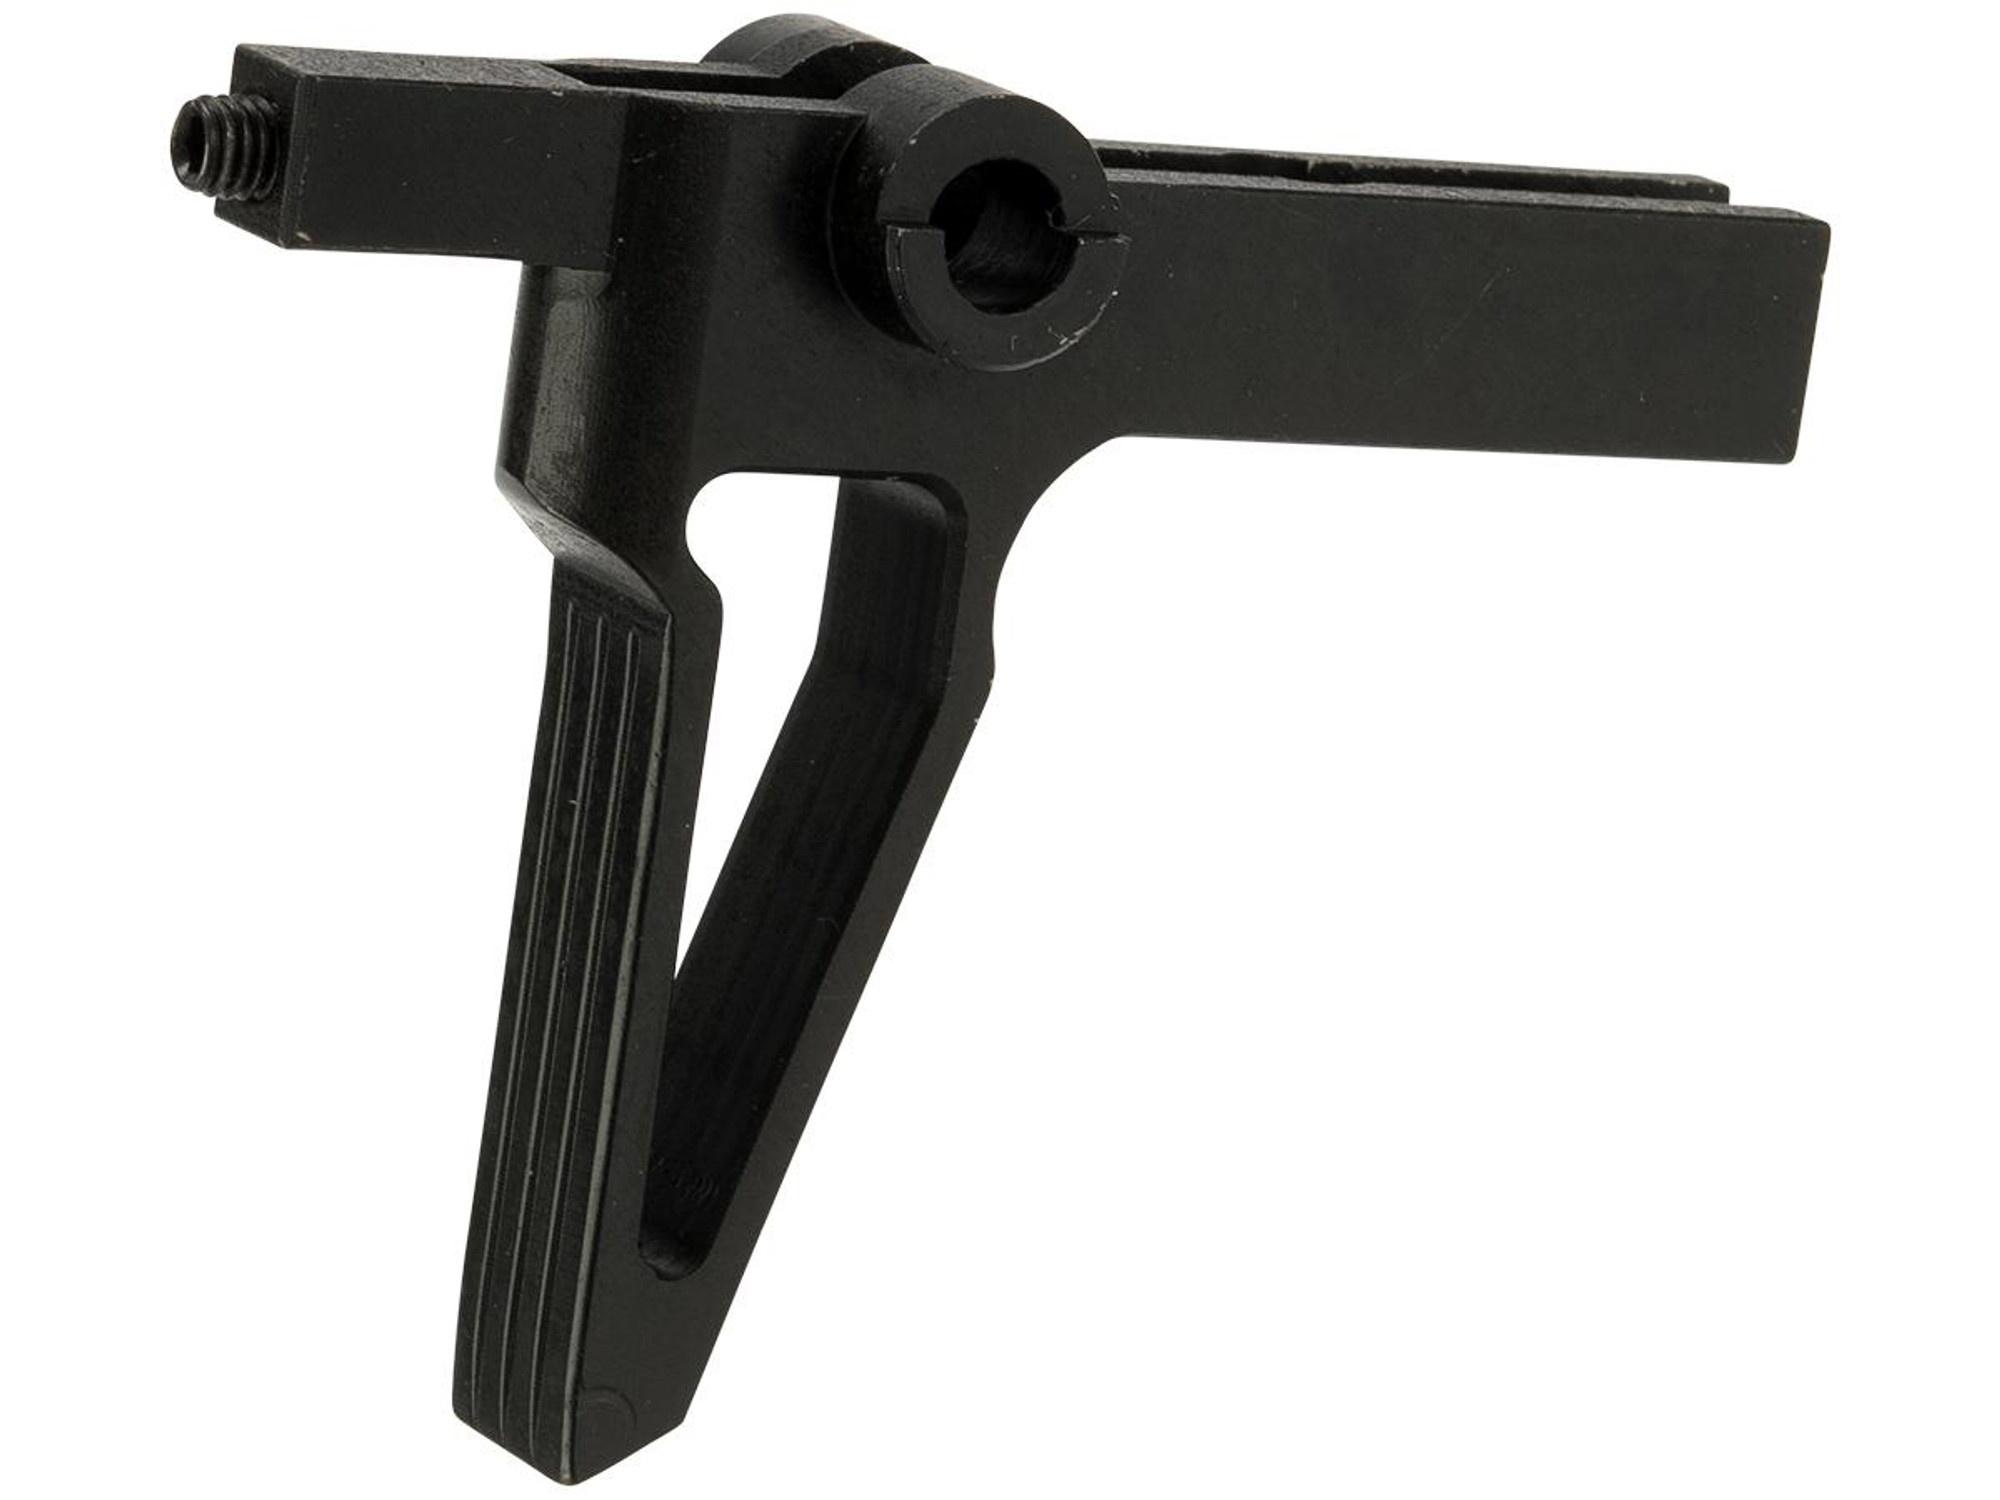 G&P Stainless Steel Flat Face Trigger for G&P / WA Gas Blowback M4 Airsoft Rifles (Color: Black)